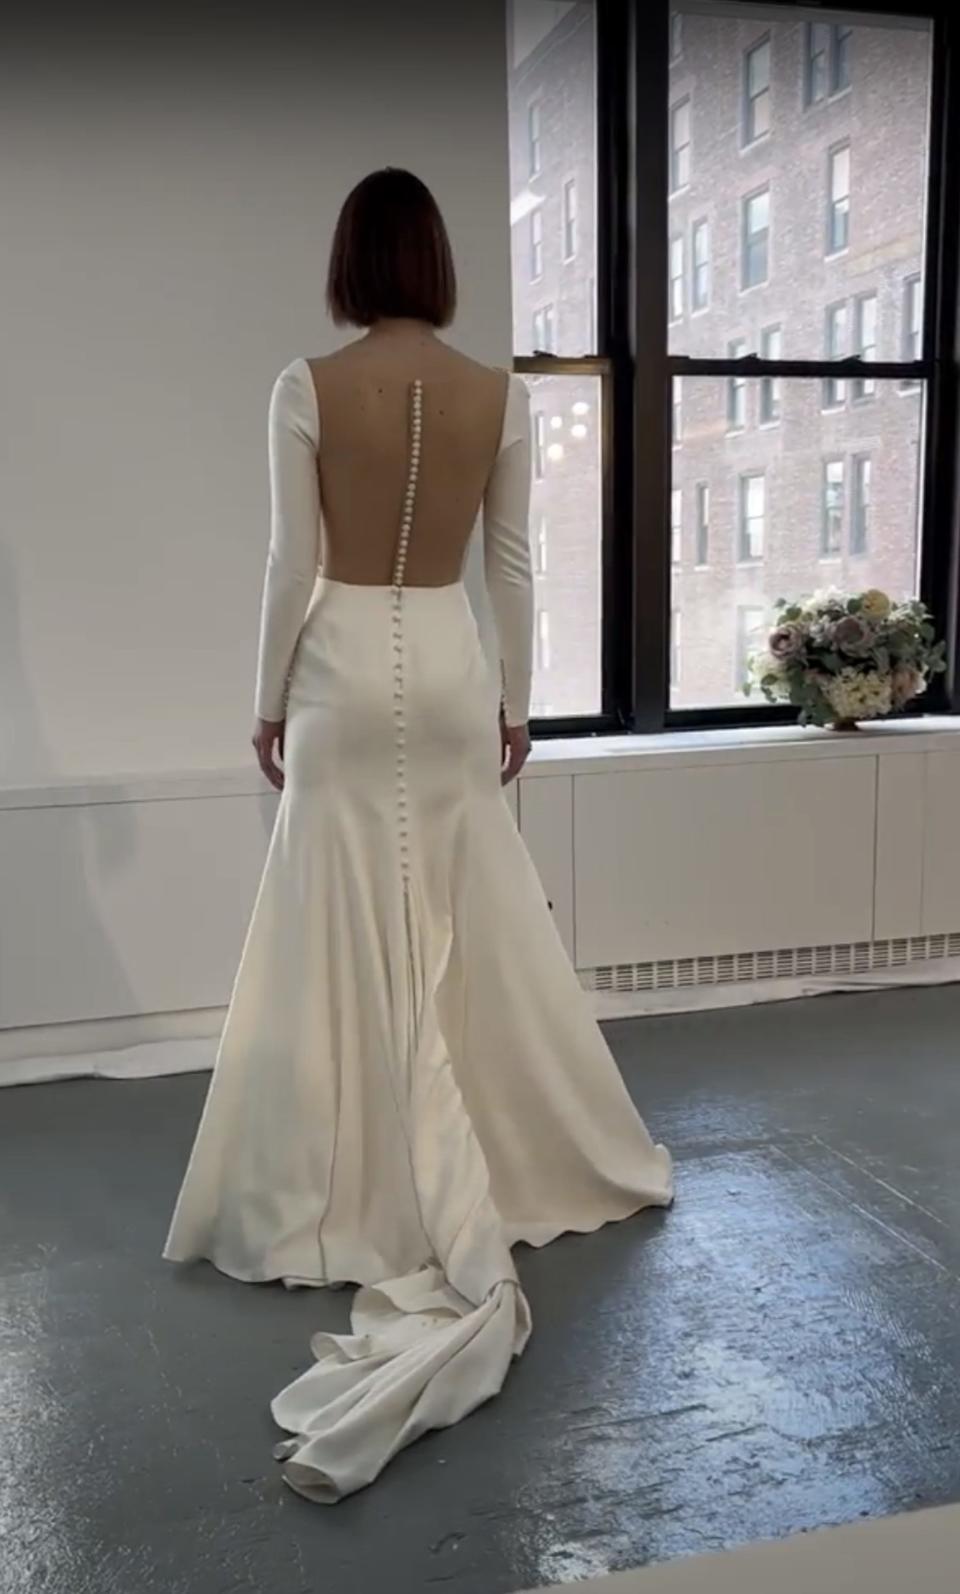 A woman poses in a wedding dress with buttons down the back.